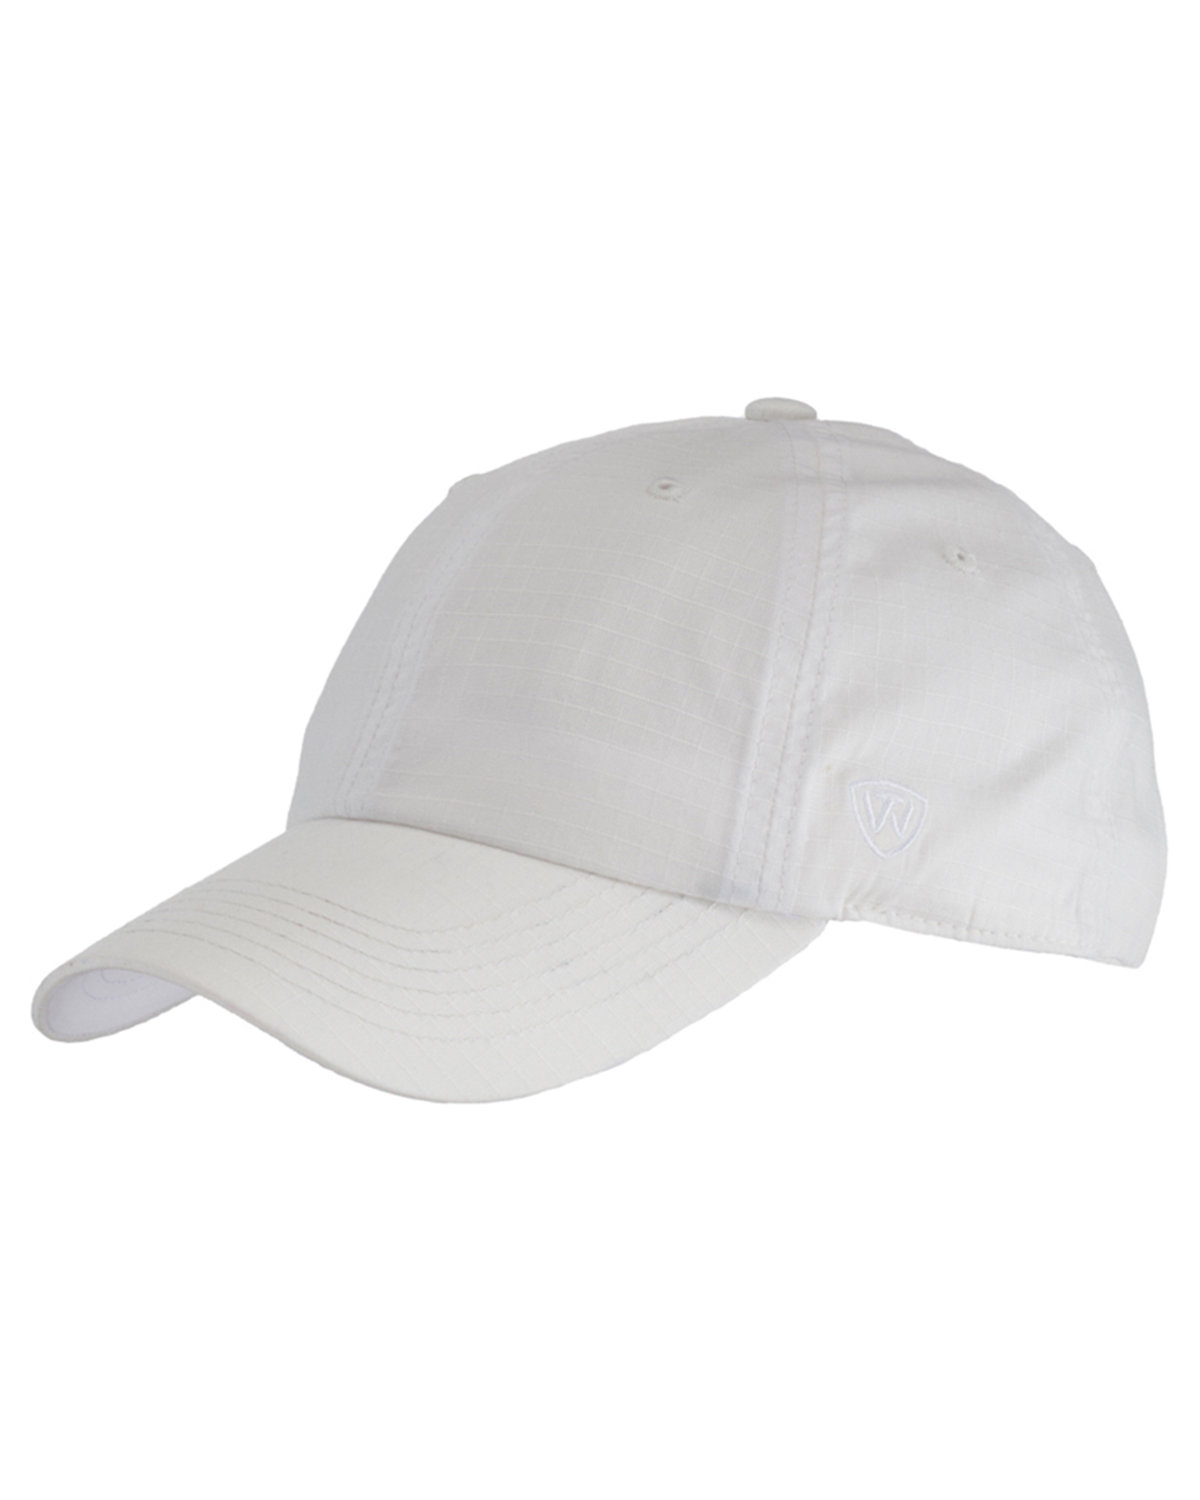 J. America 5537 - Ripper Washed Cotton Ripstop Hat